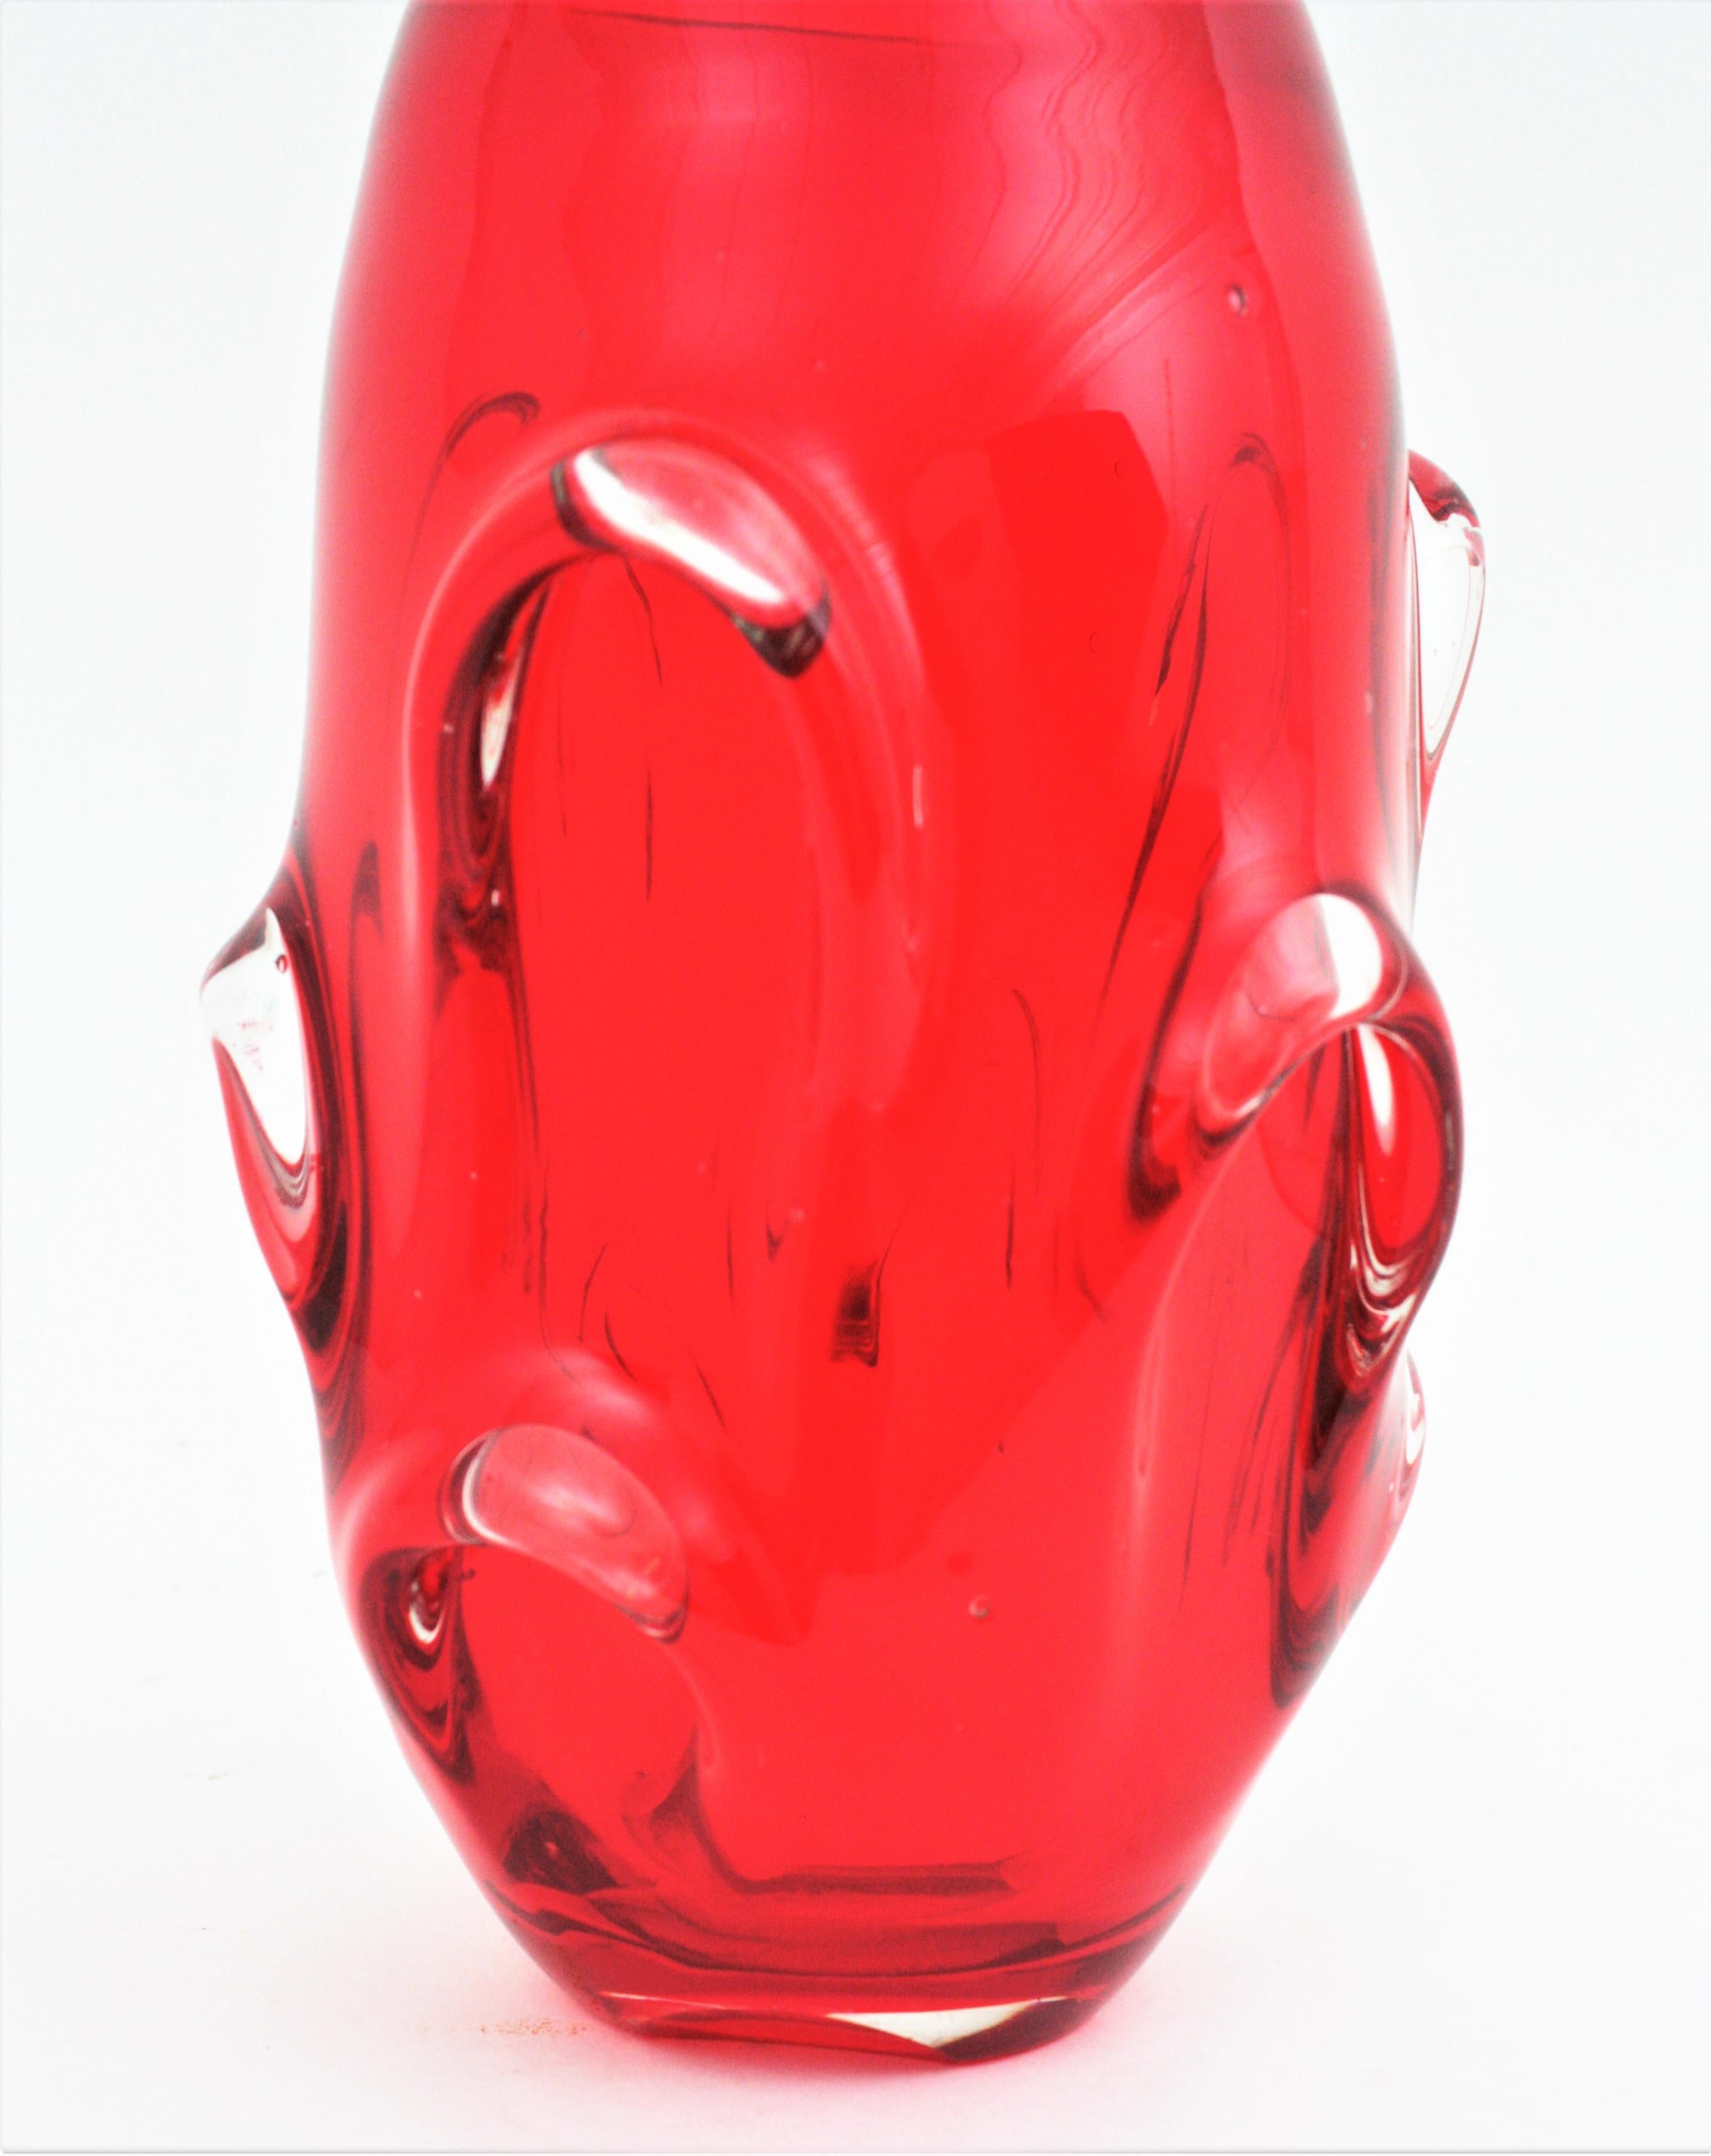 Archimede Seguso Murano Sommerso Red Art Glass Vase with Pulled Details For Sale 3